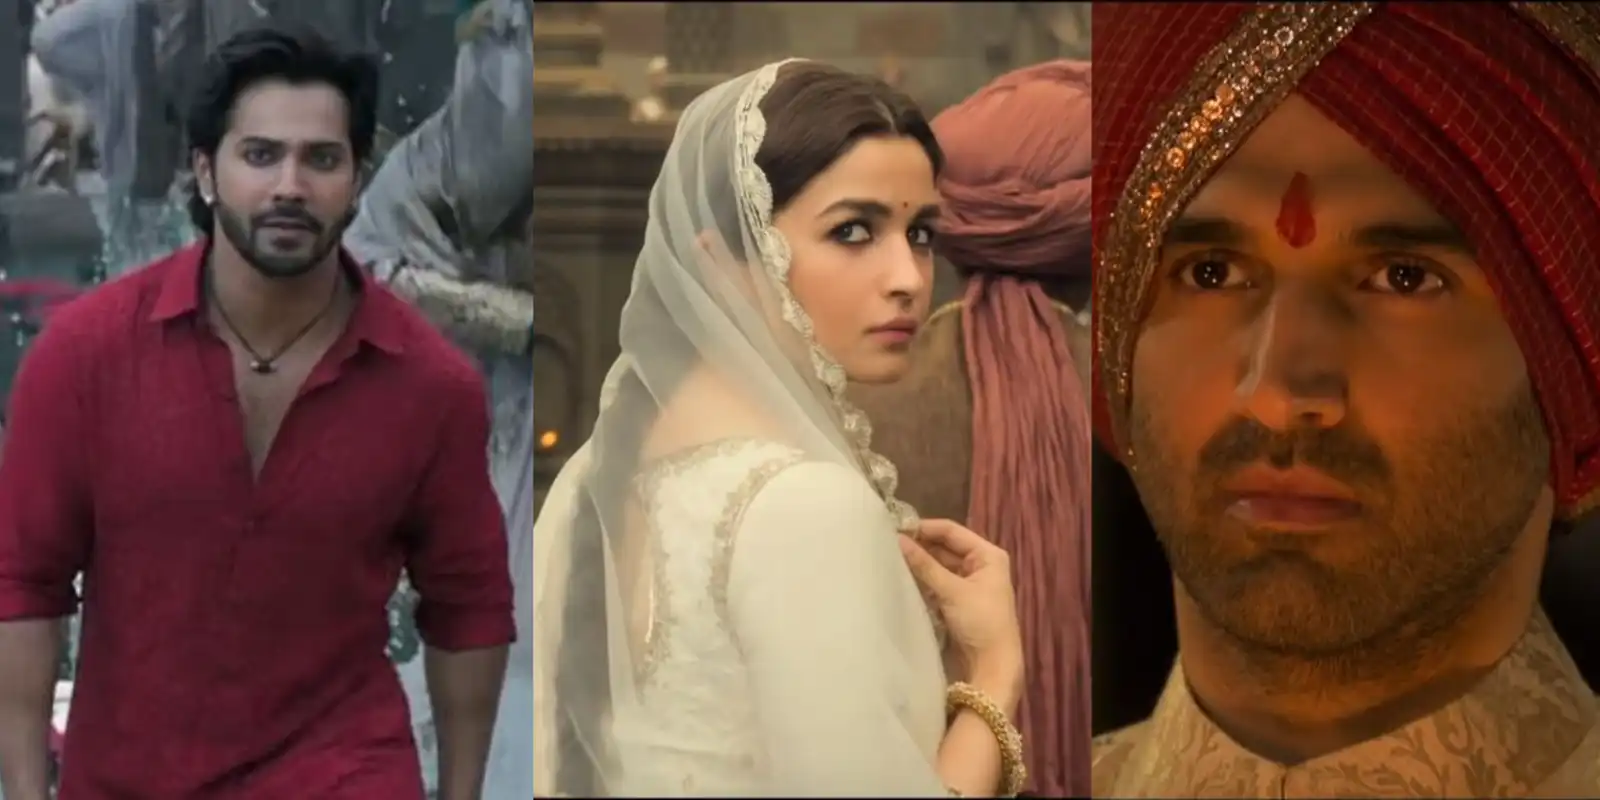 5 Things That Came To Our Mind About Kalank's Storyline After Watching The Teaser And 1st Song!